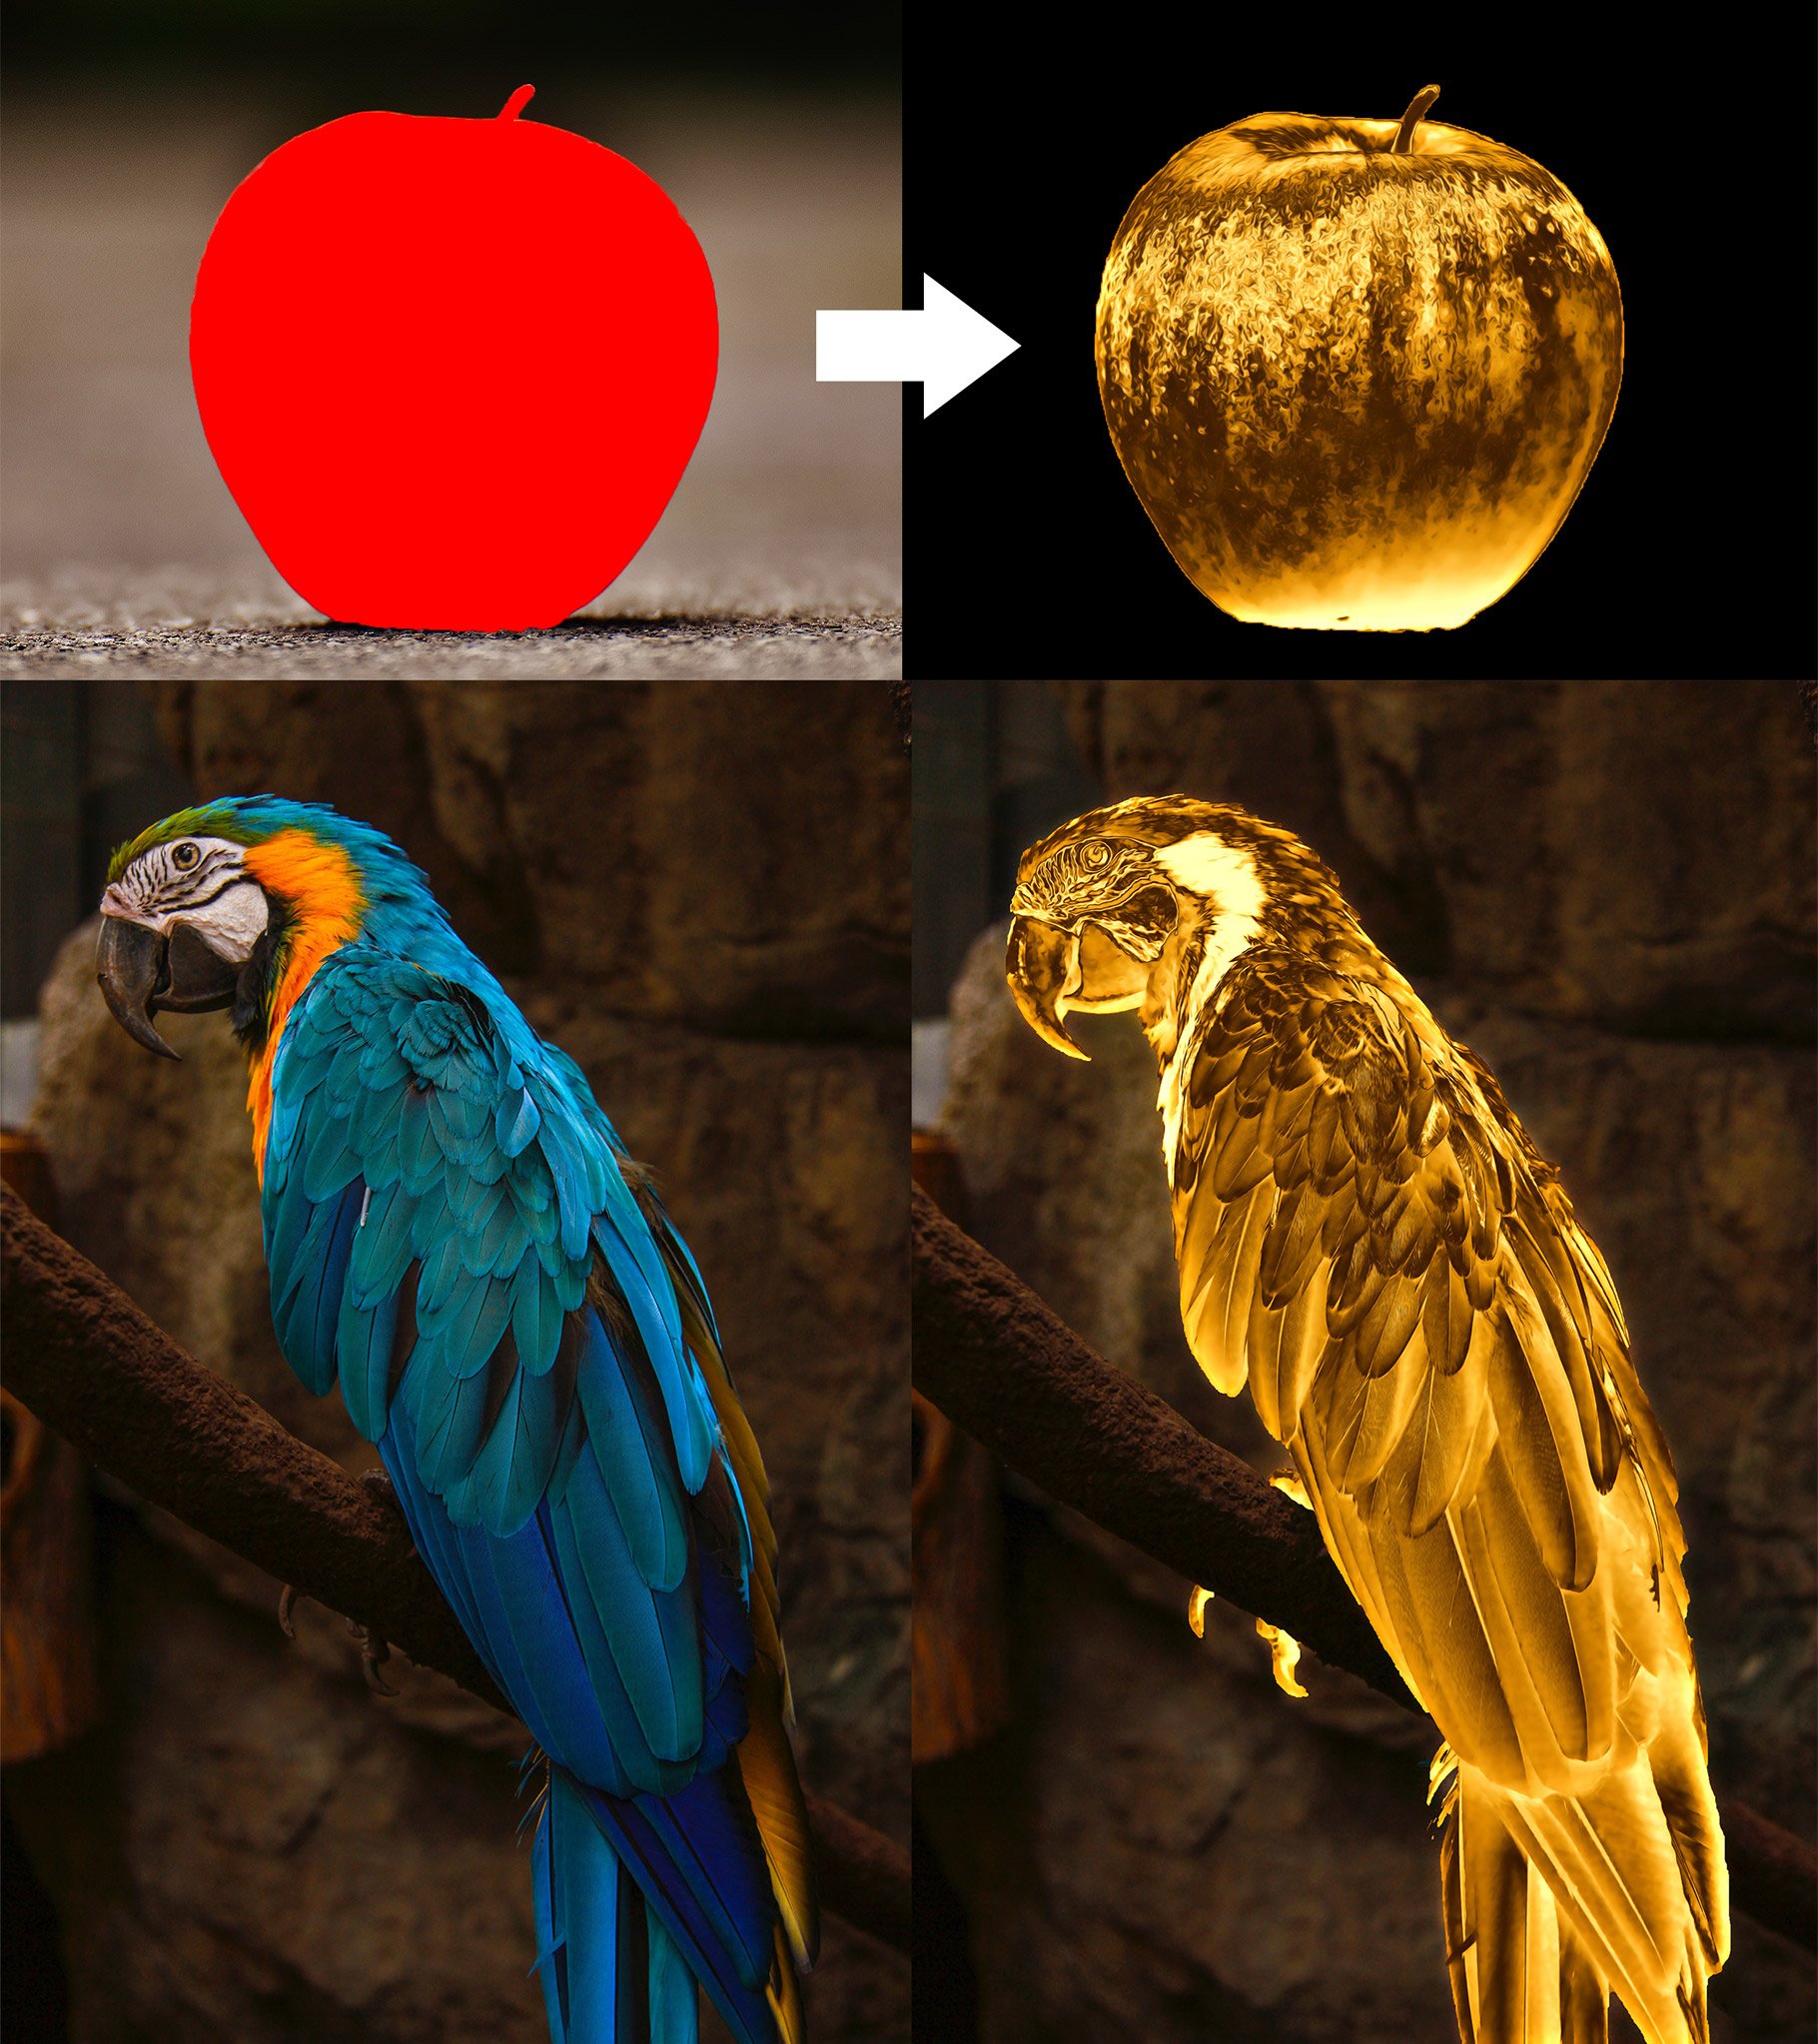 Turn Anything into Gold in Photoshoppreview image.